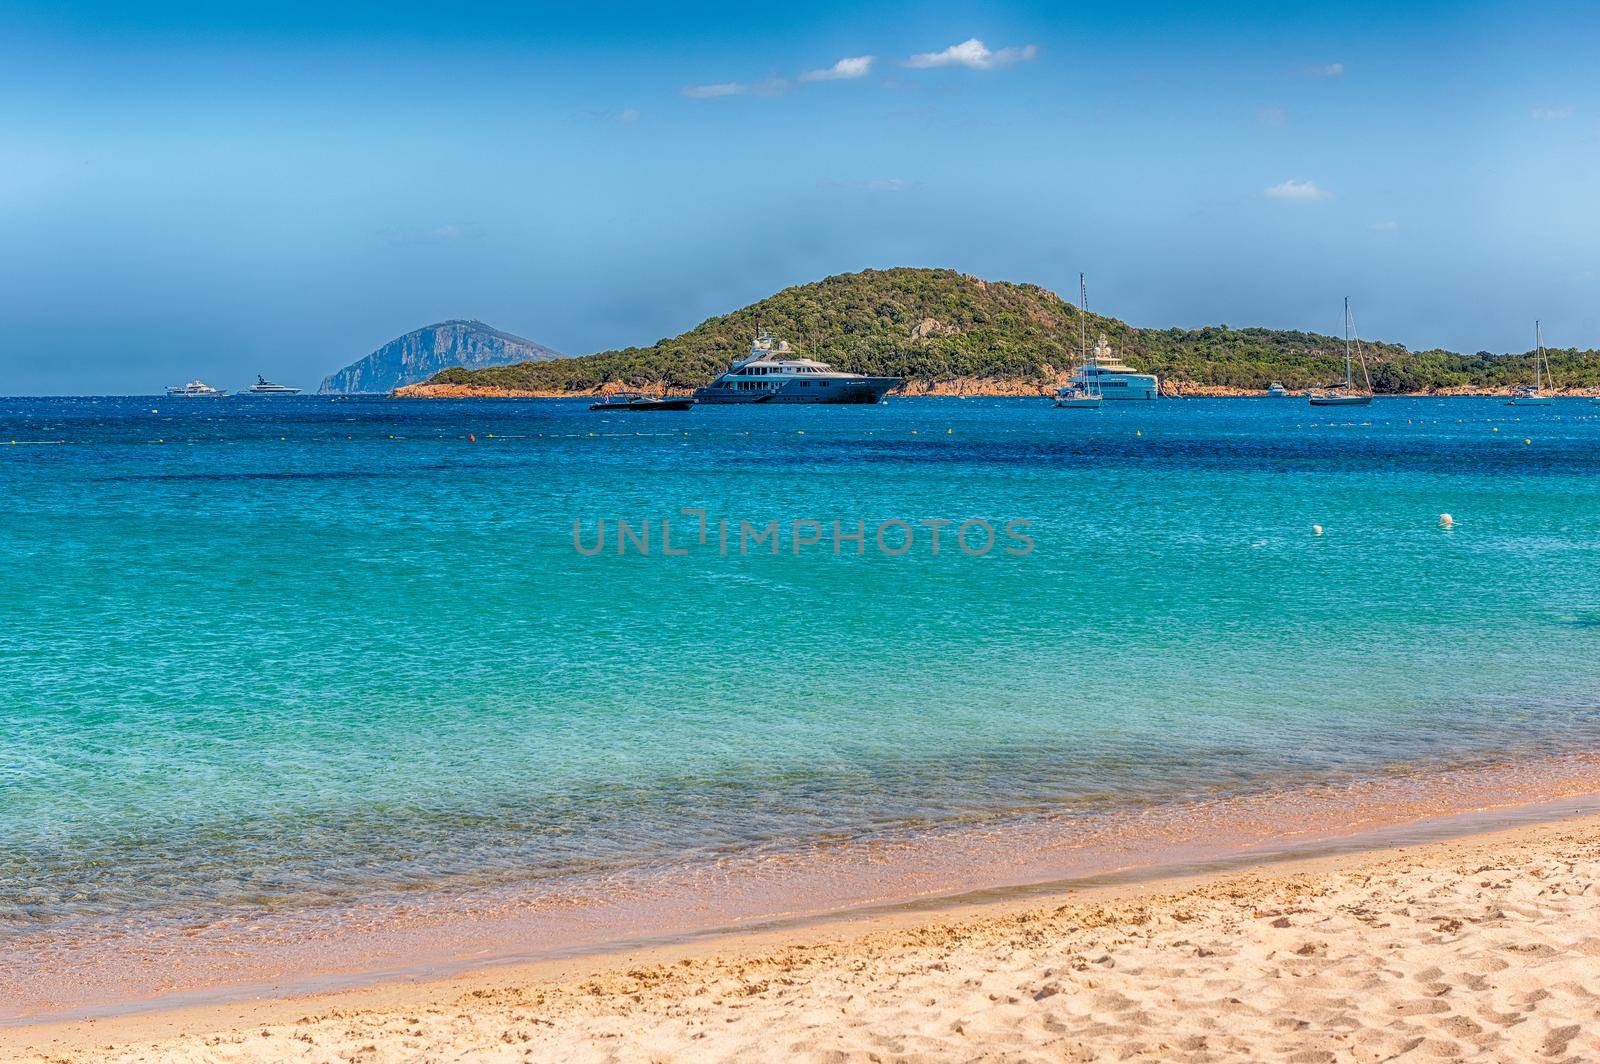 Luxury yachts standing in front of Liscia Ruja, one of the most beautiful beaches in Costa Smeralda, Sardinia, Italy